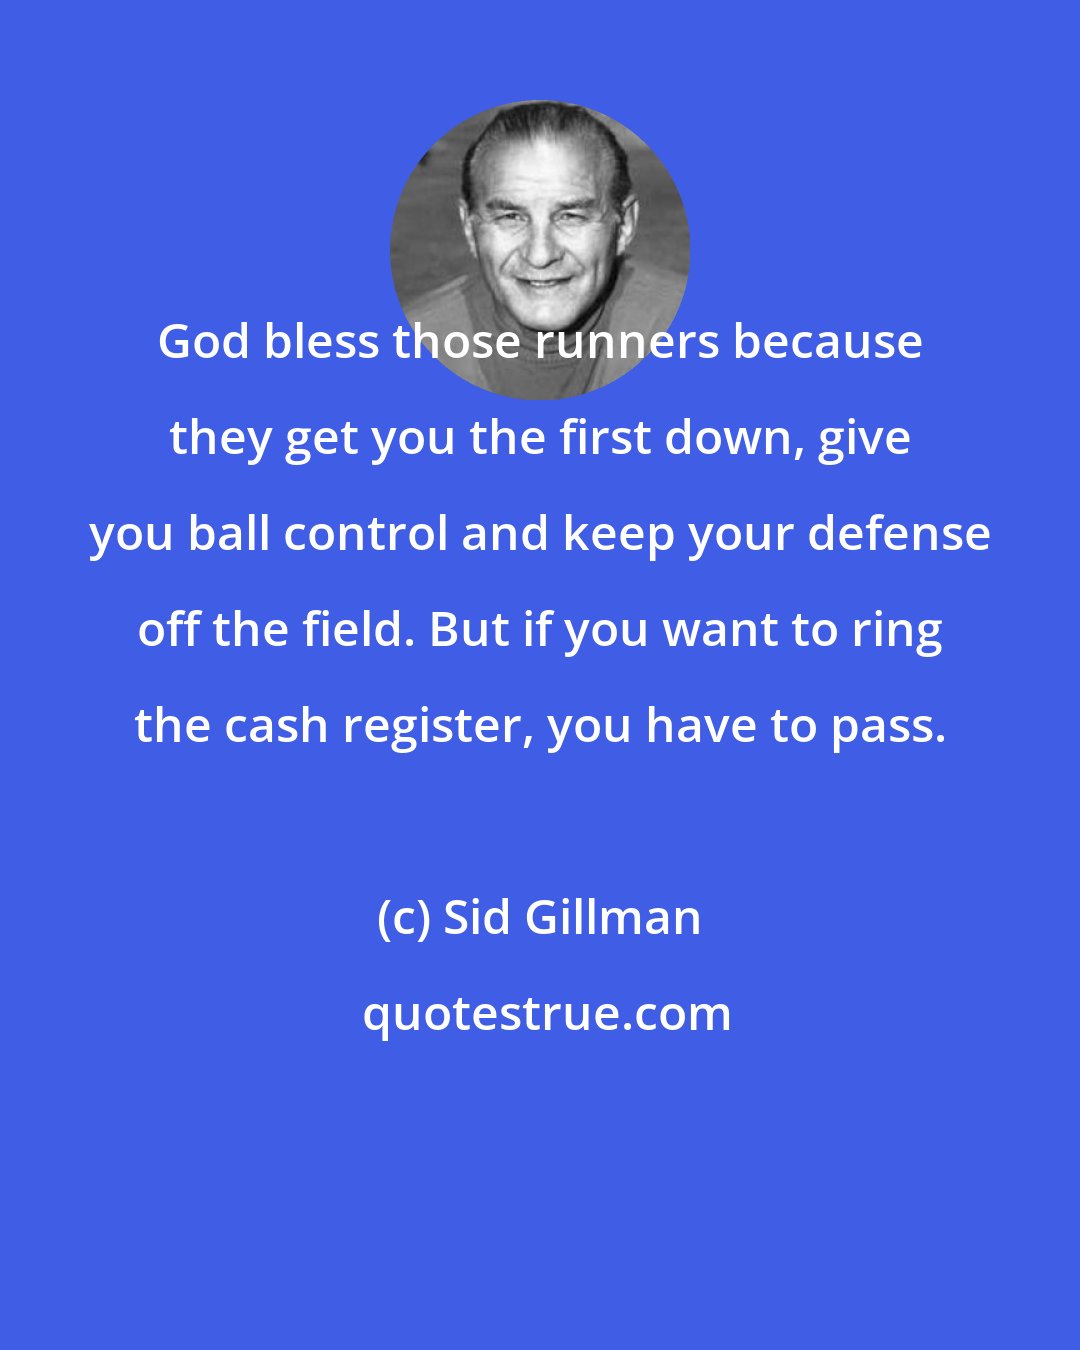 Sid Gillman: God bless those runners because they get you the first down, give you ball control and keep your defense off the field. But if you want to ring the cash register, you have to pass.